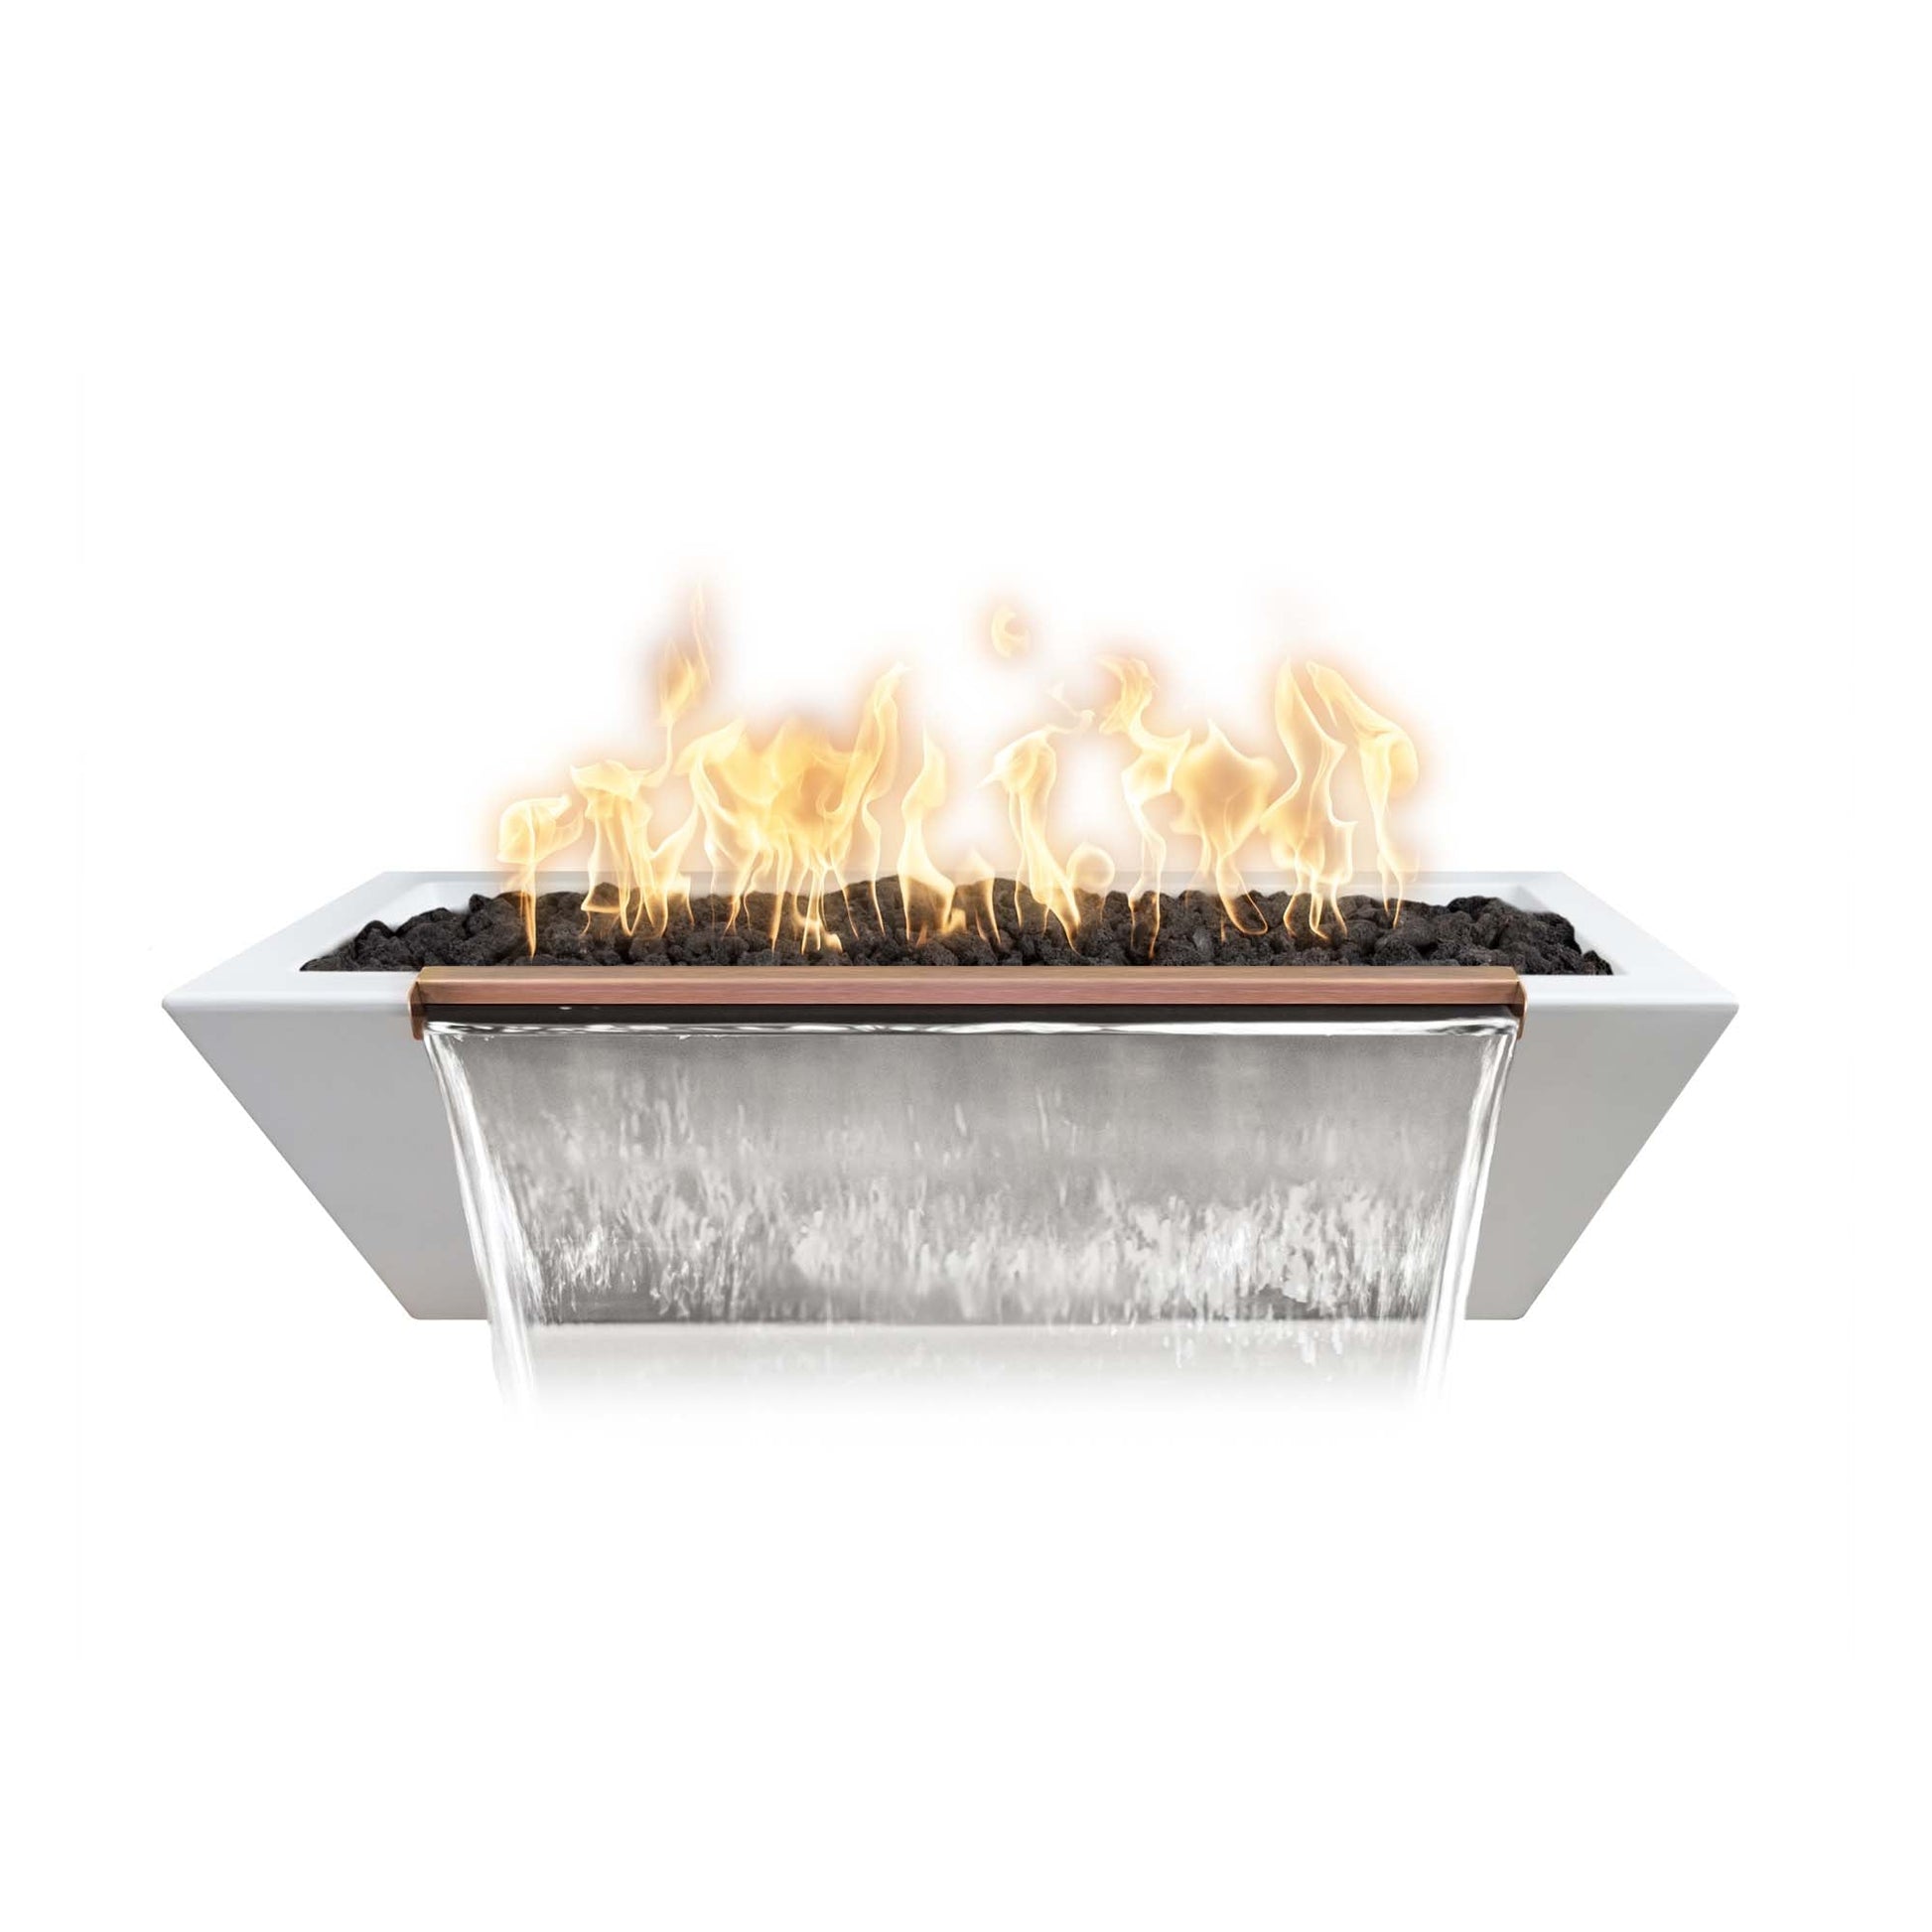 The Outdoor Plus Linear Maya 72" Chestnut GFRC Concrete Liquid Propane Fire & Water Bowl with 12V Electronic Ignition